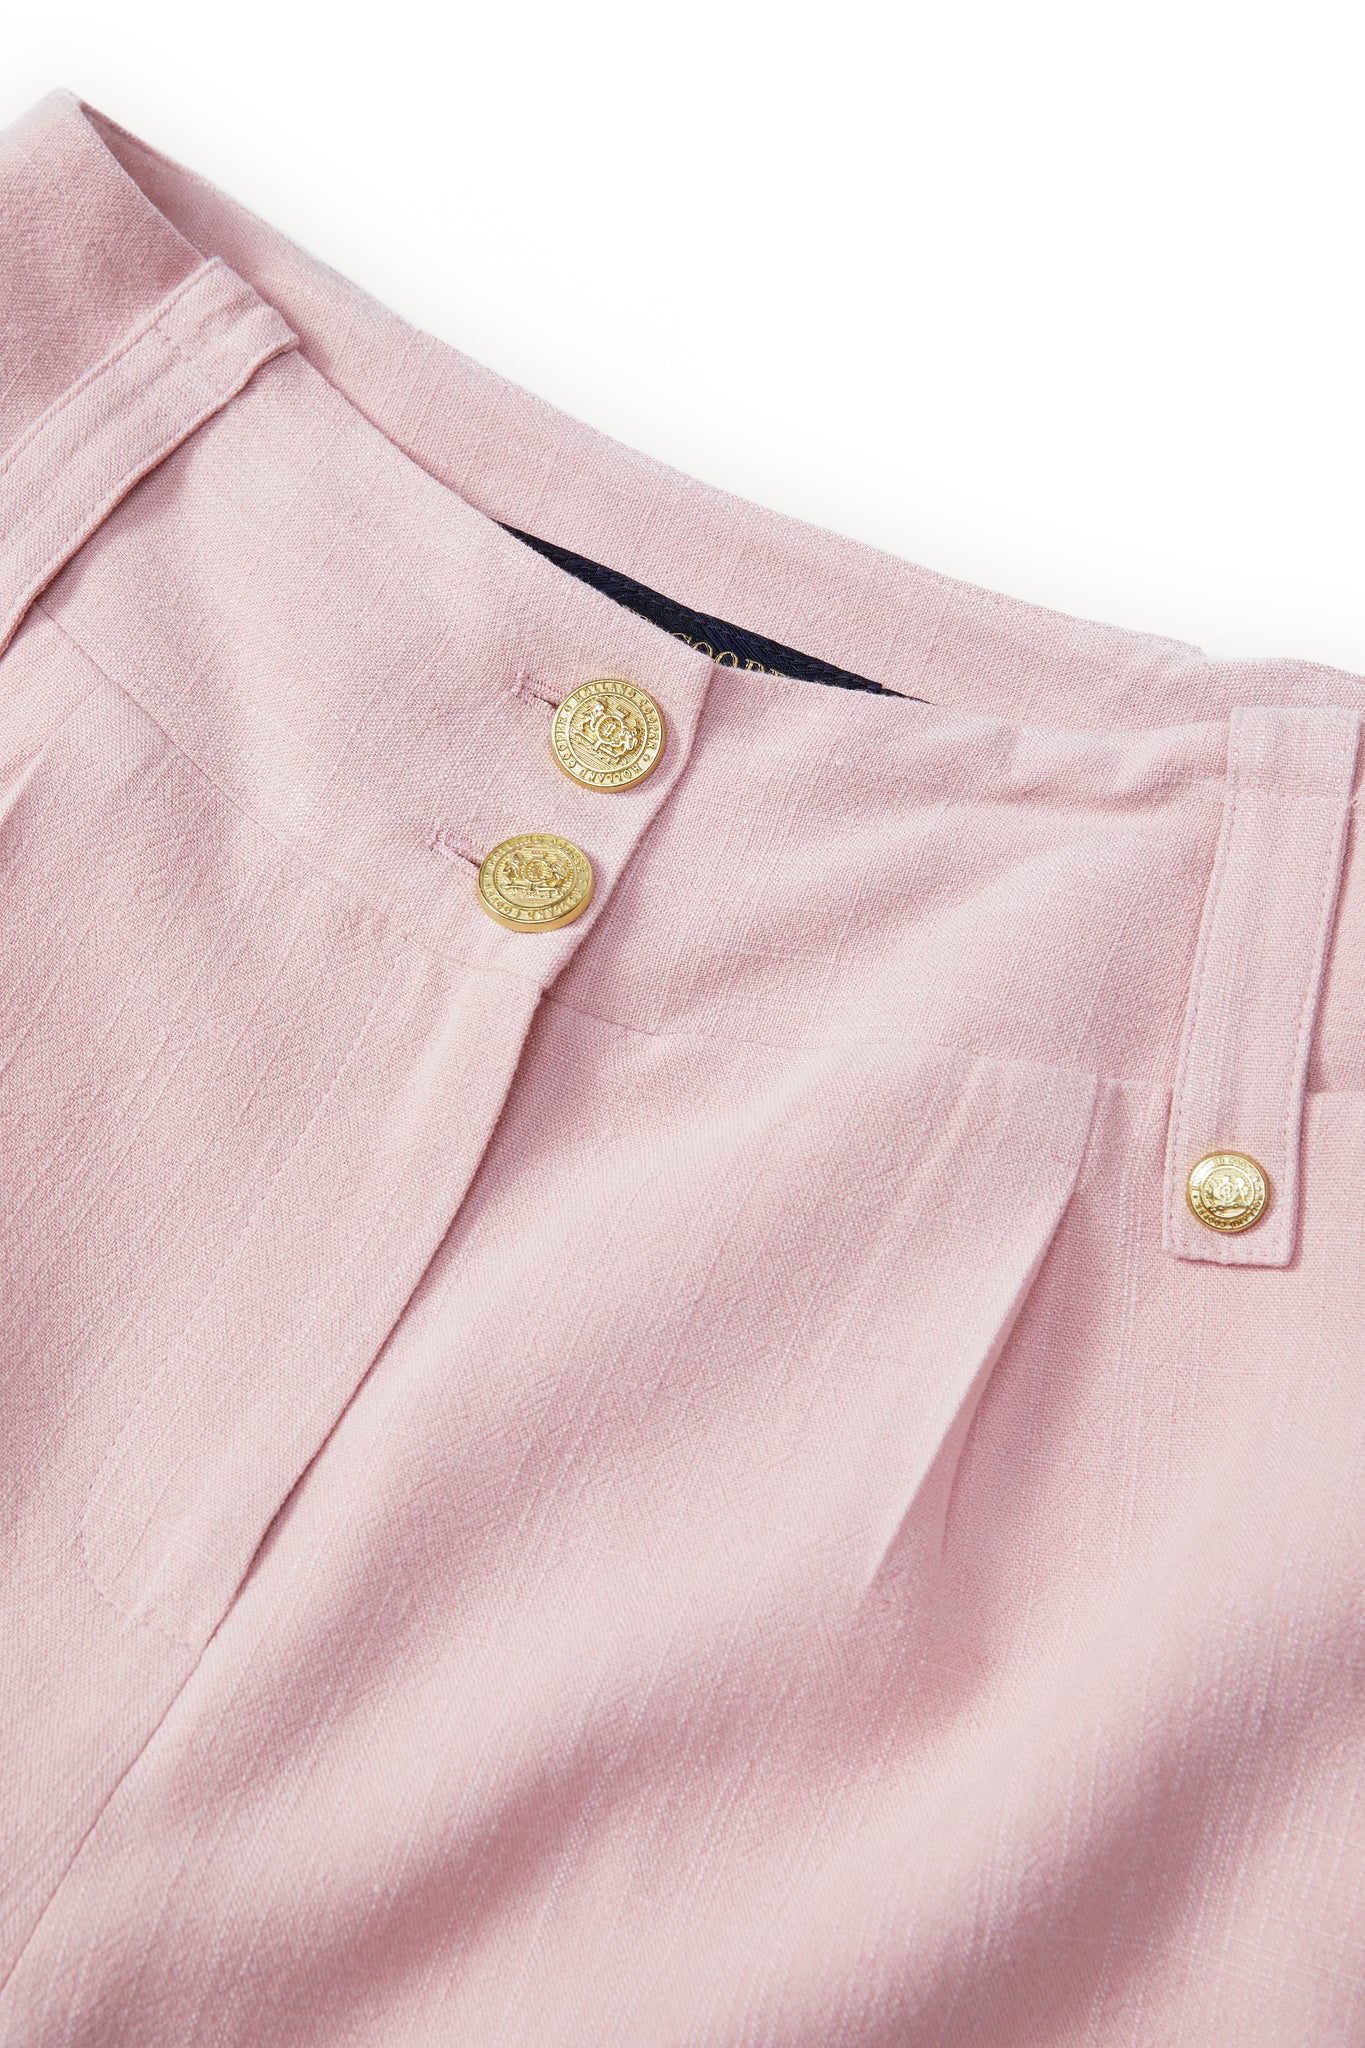 gold stud button detail of womens light pink linen tailored shorts with two single knife pleats and centre front zip fly fastening